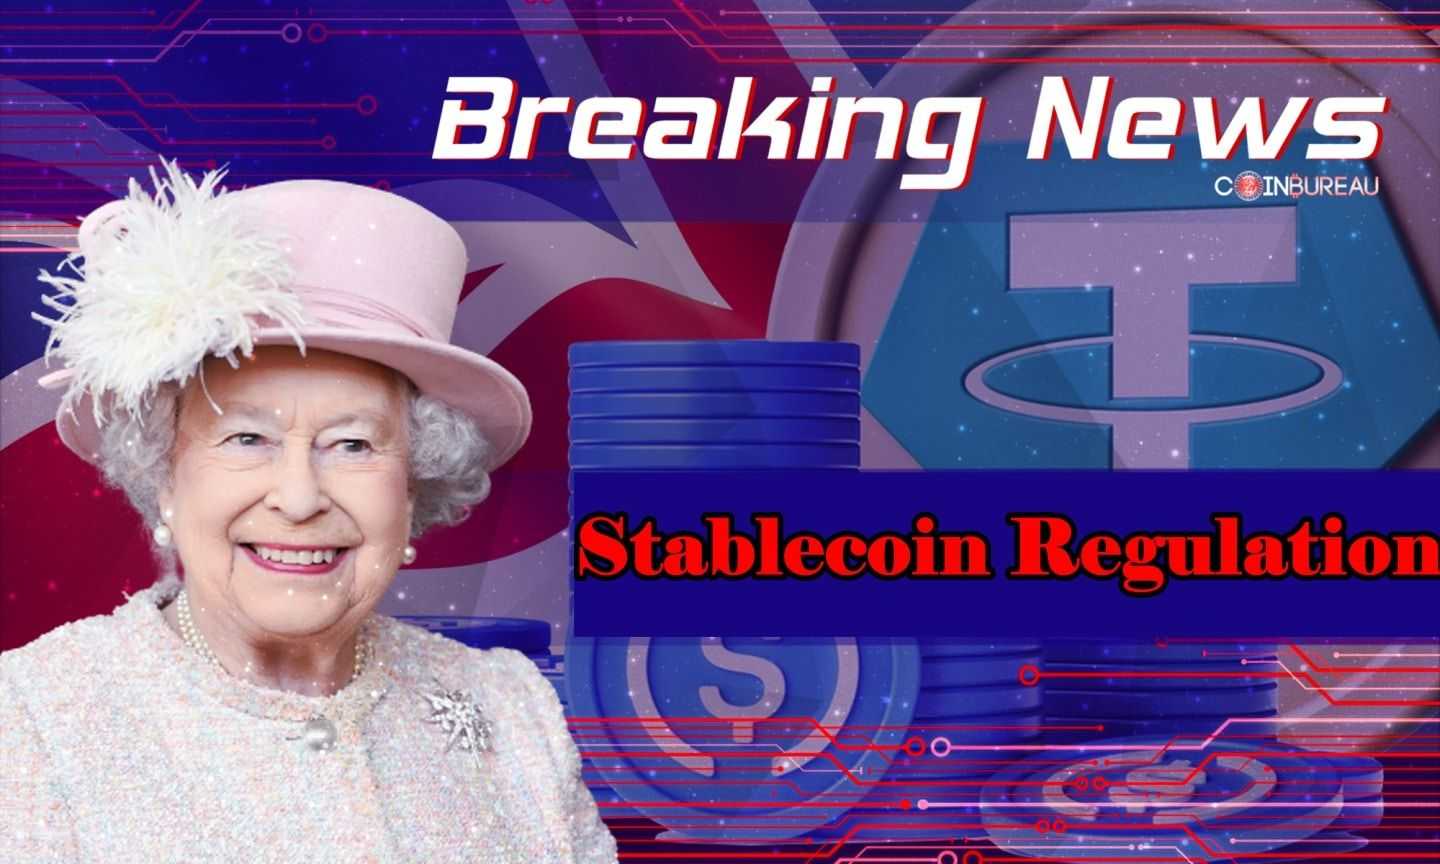 UK To Go Ahead With Stablecoin Regulations After Queen’s Approval